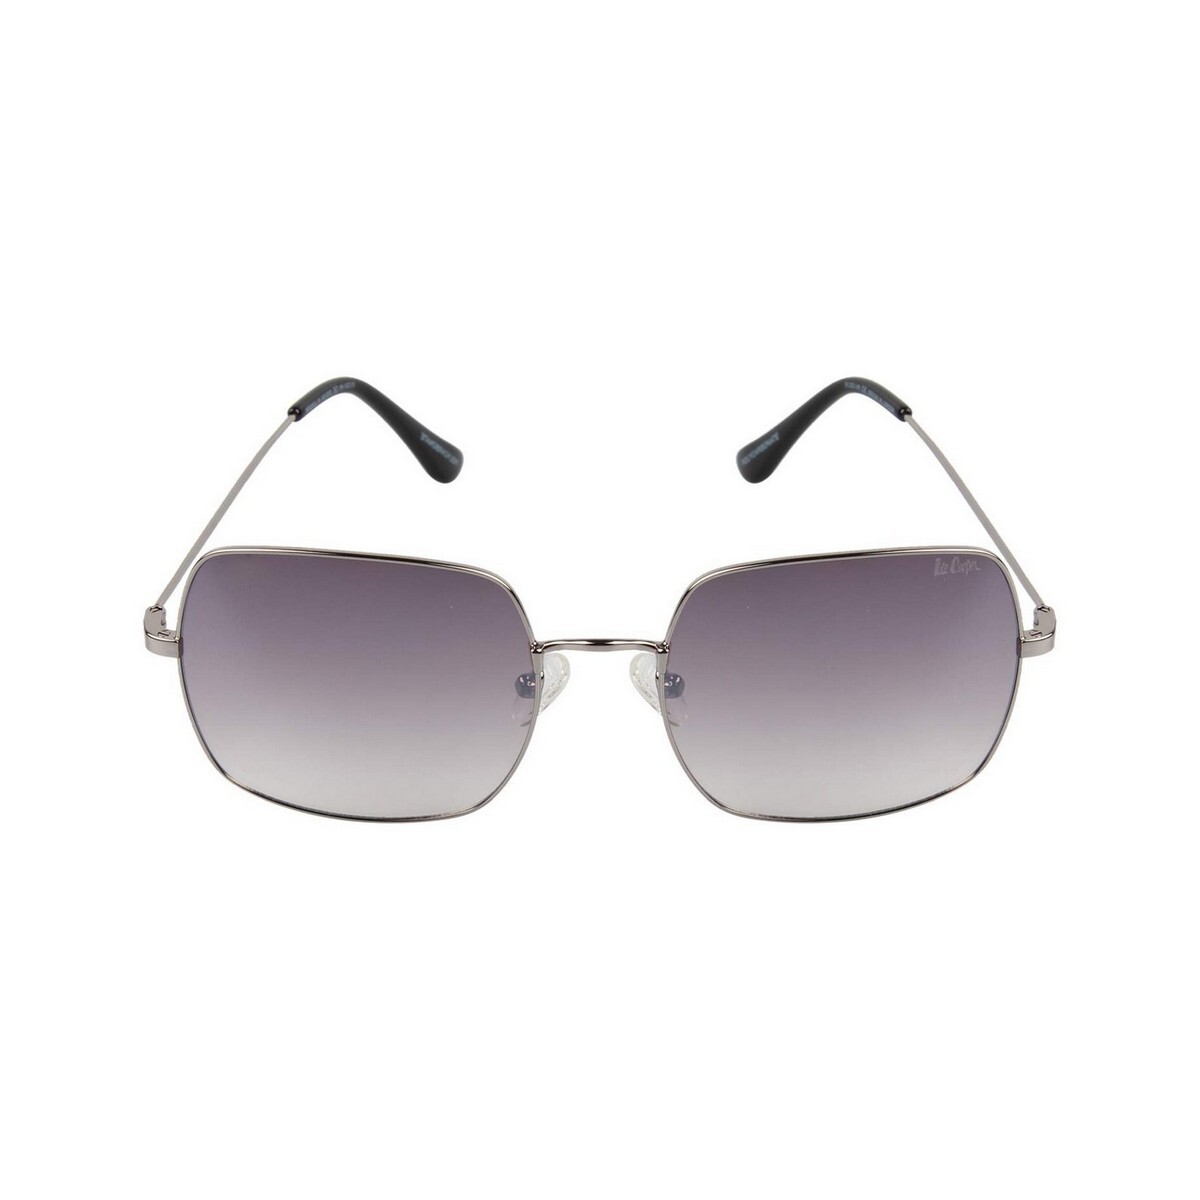 Lee Cooper Female Silver Frame With Grey Lens Sunglass